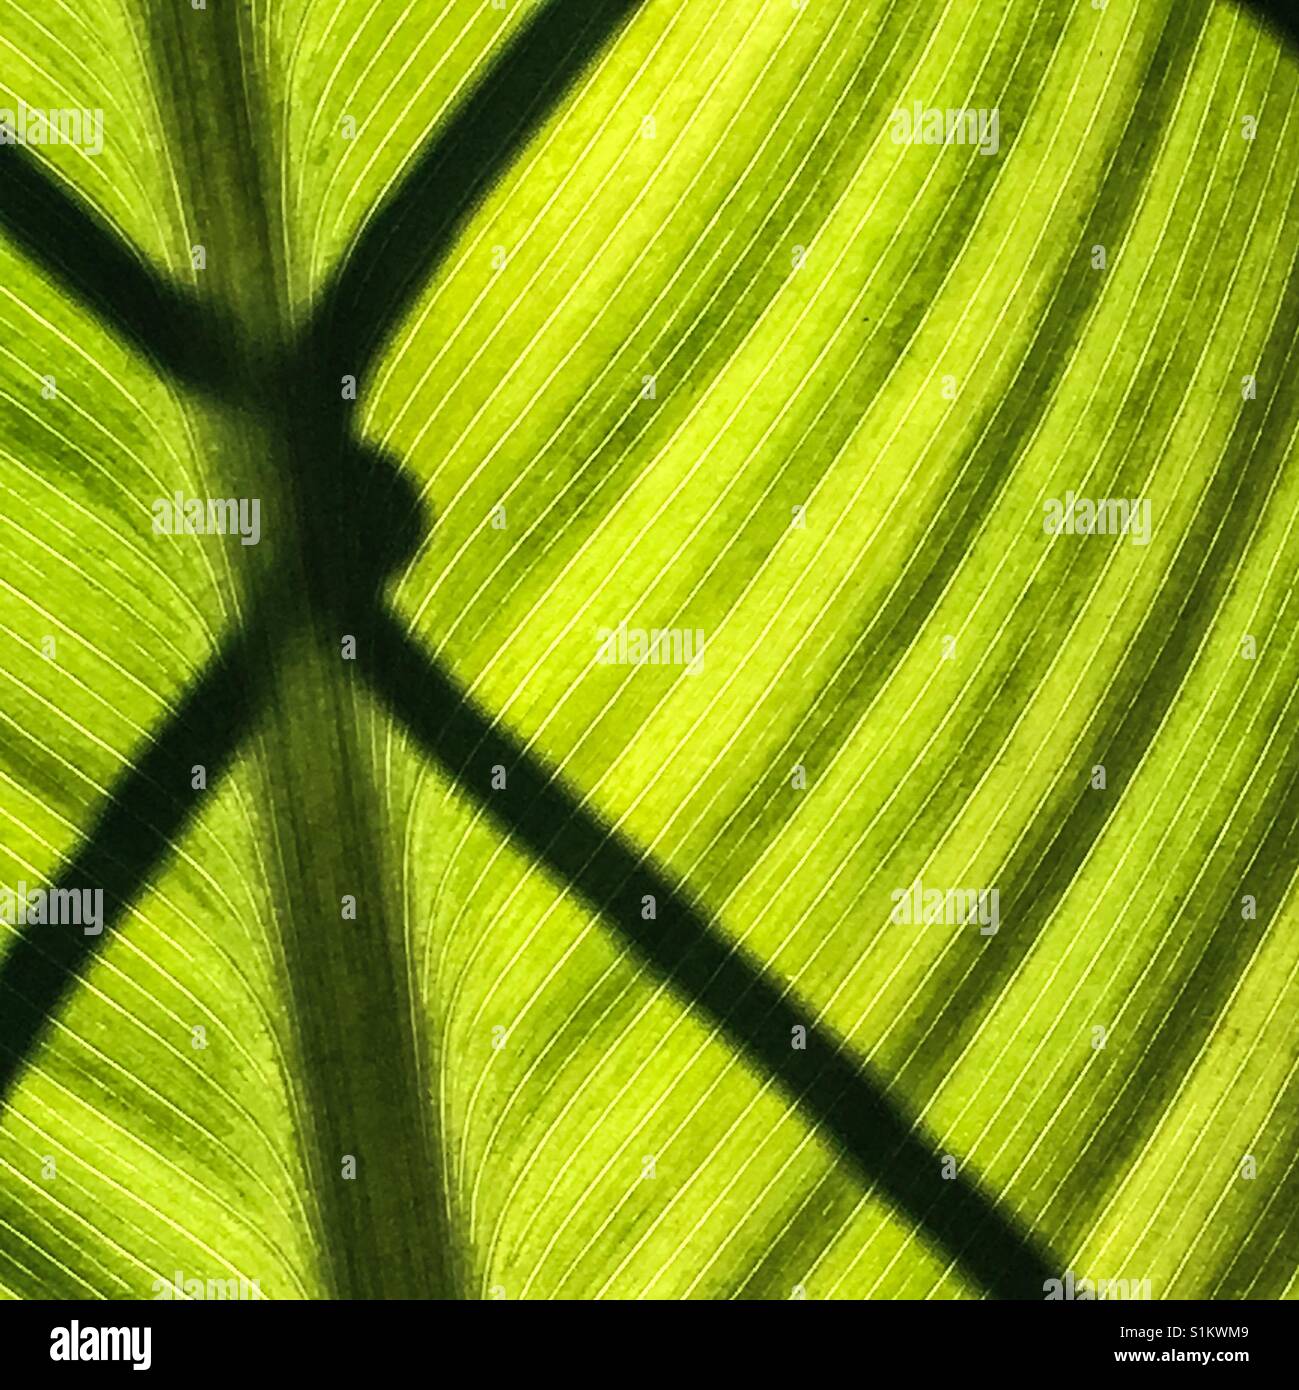 Shadow of chain link fence closeup on  large tropical plant leaf Stock Photo